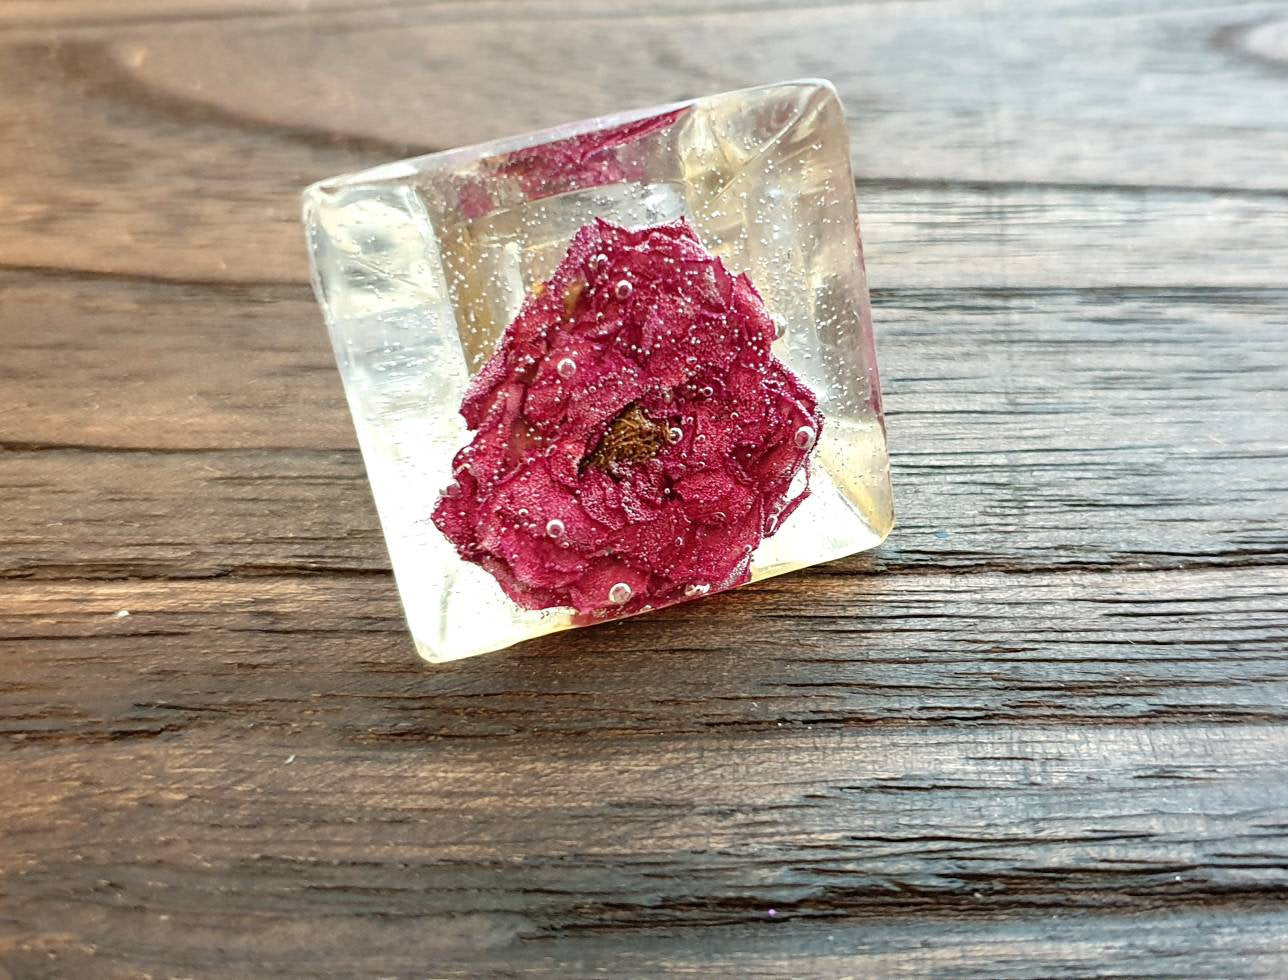 Statement Square Resin Ring, Handmade Size 7 US N AU Real Rose Clear Ring